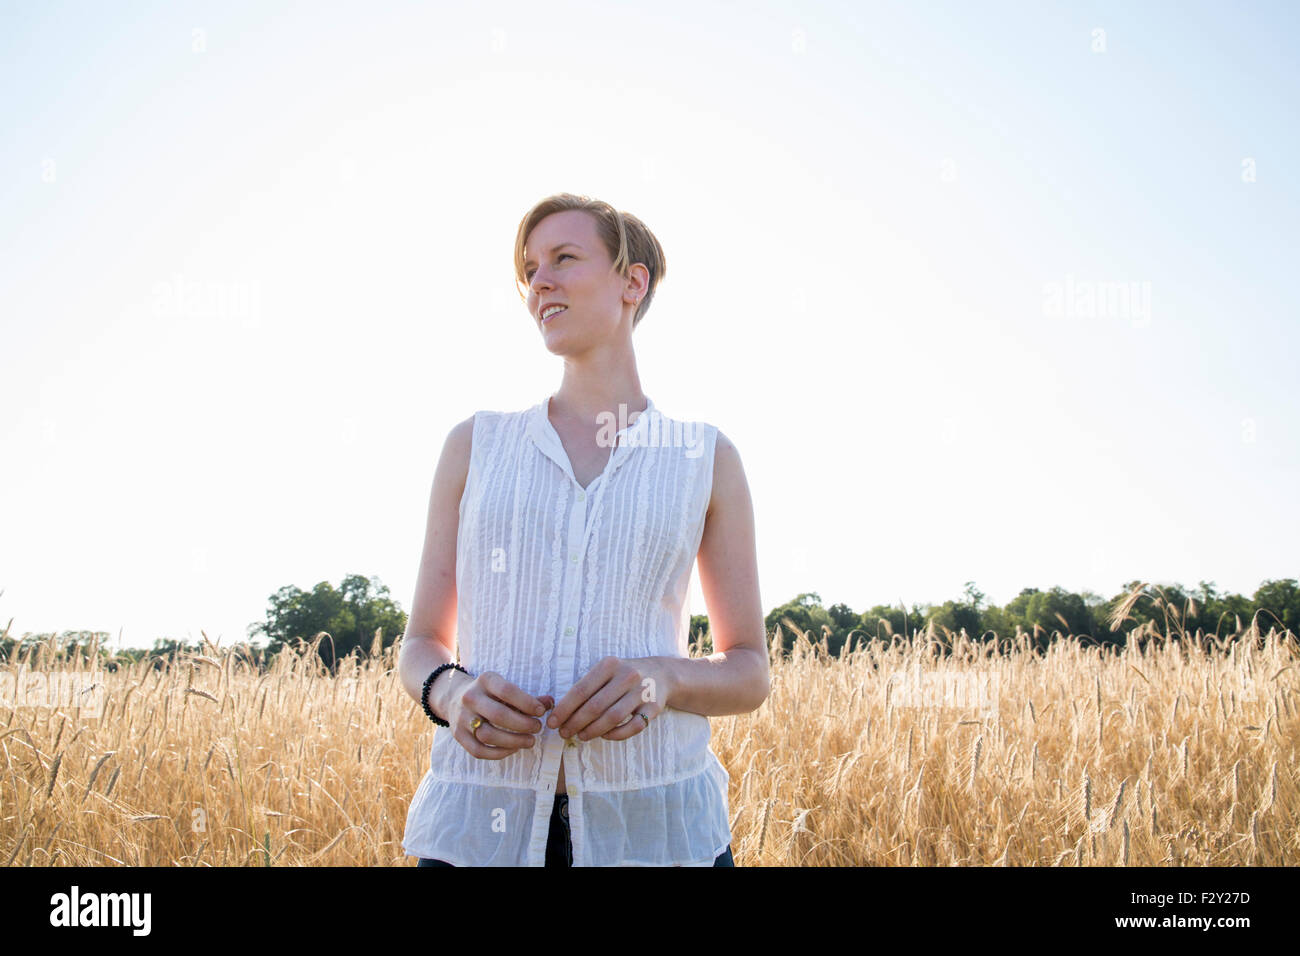 Half length portrait of a young woman standing in a cornfield. Stock Photo